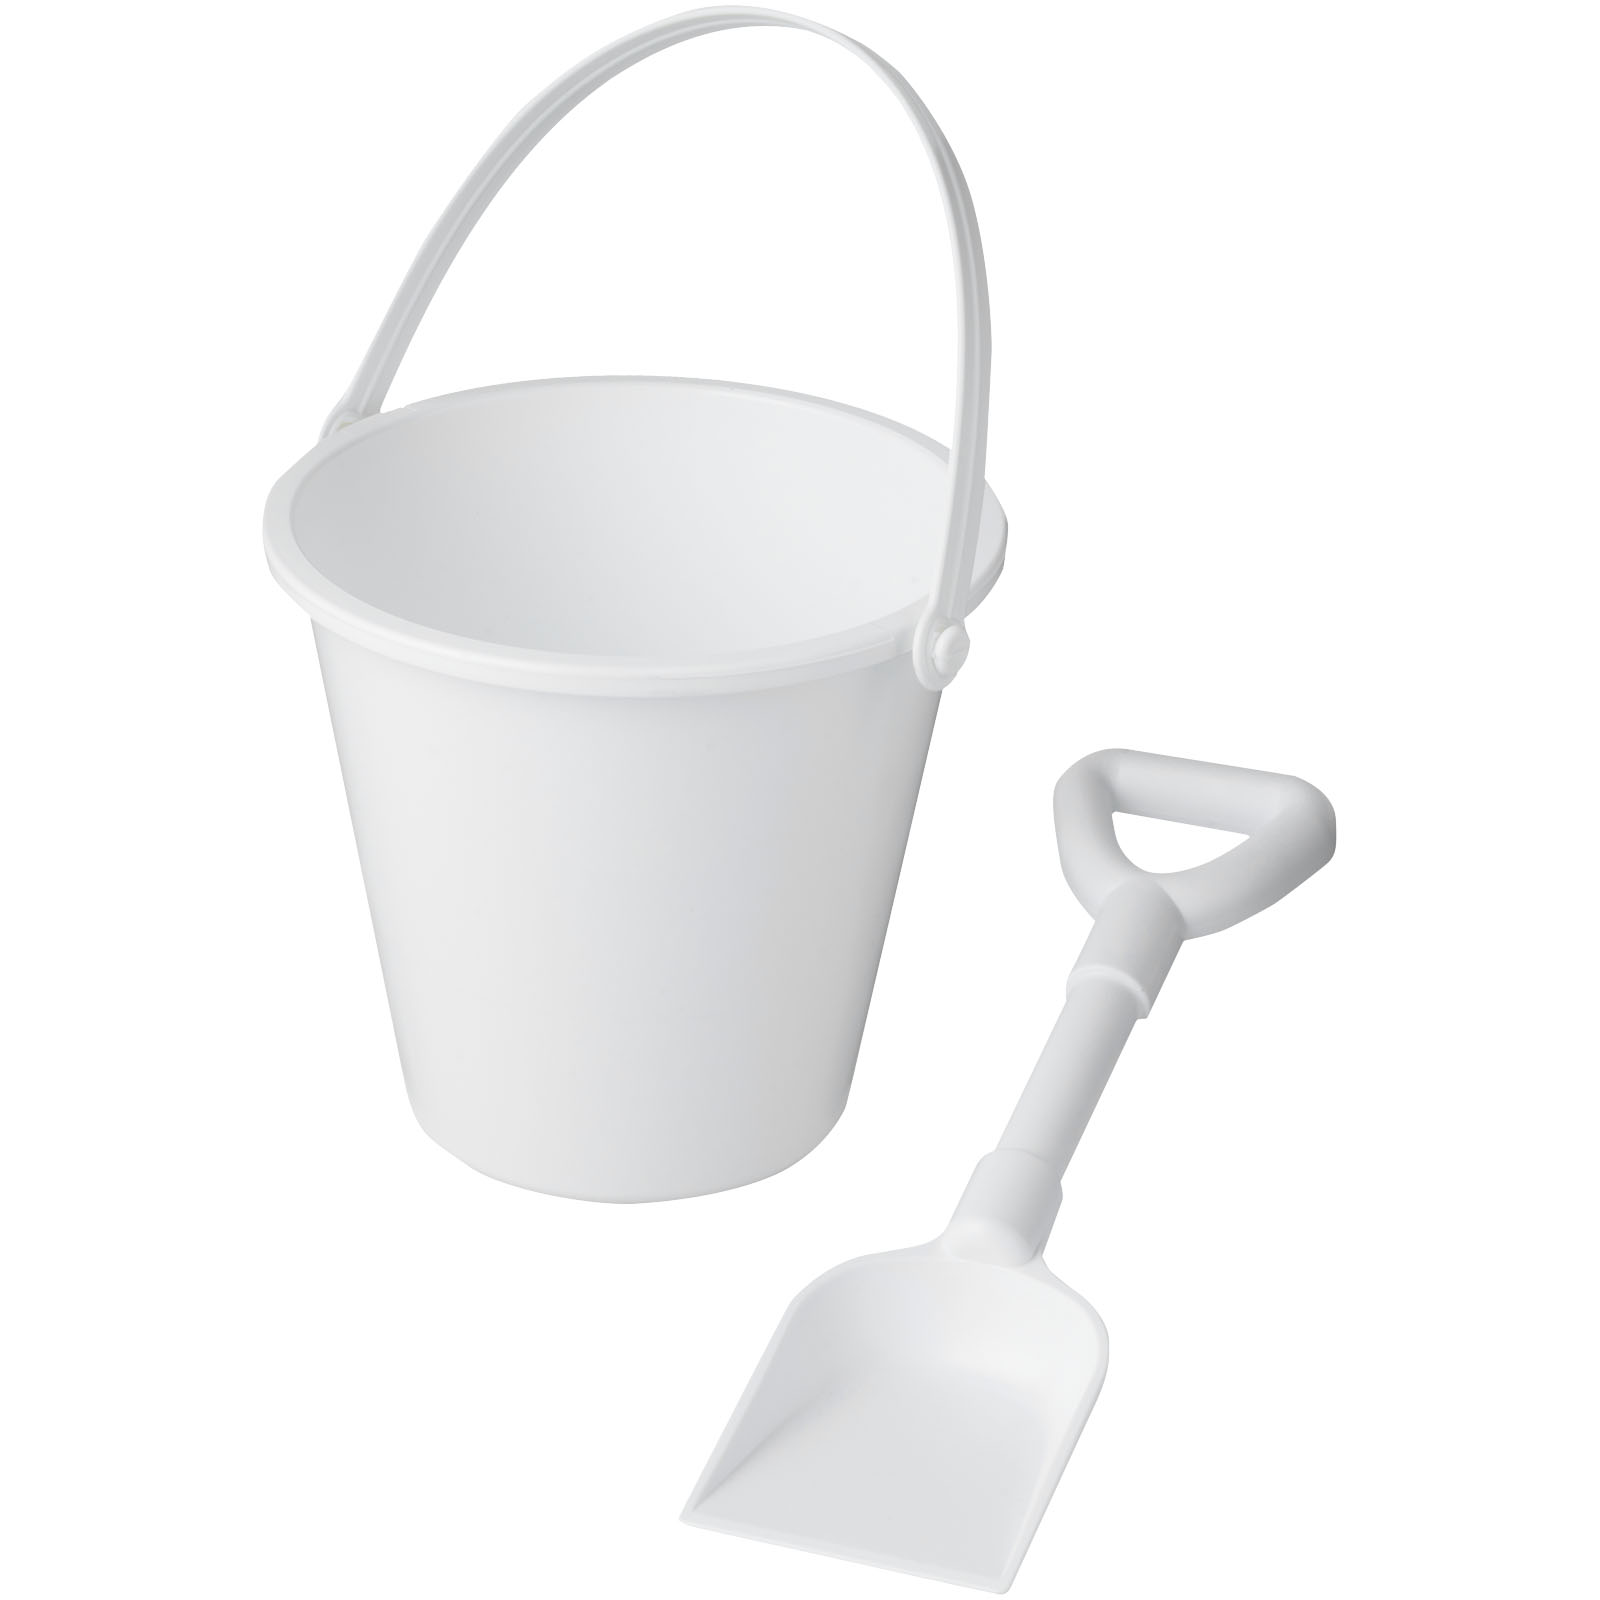 Advertising Beach Items - Tides recycled beach bucket and spade - 0